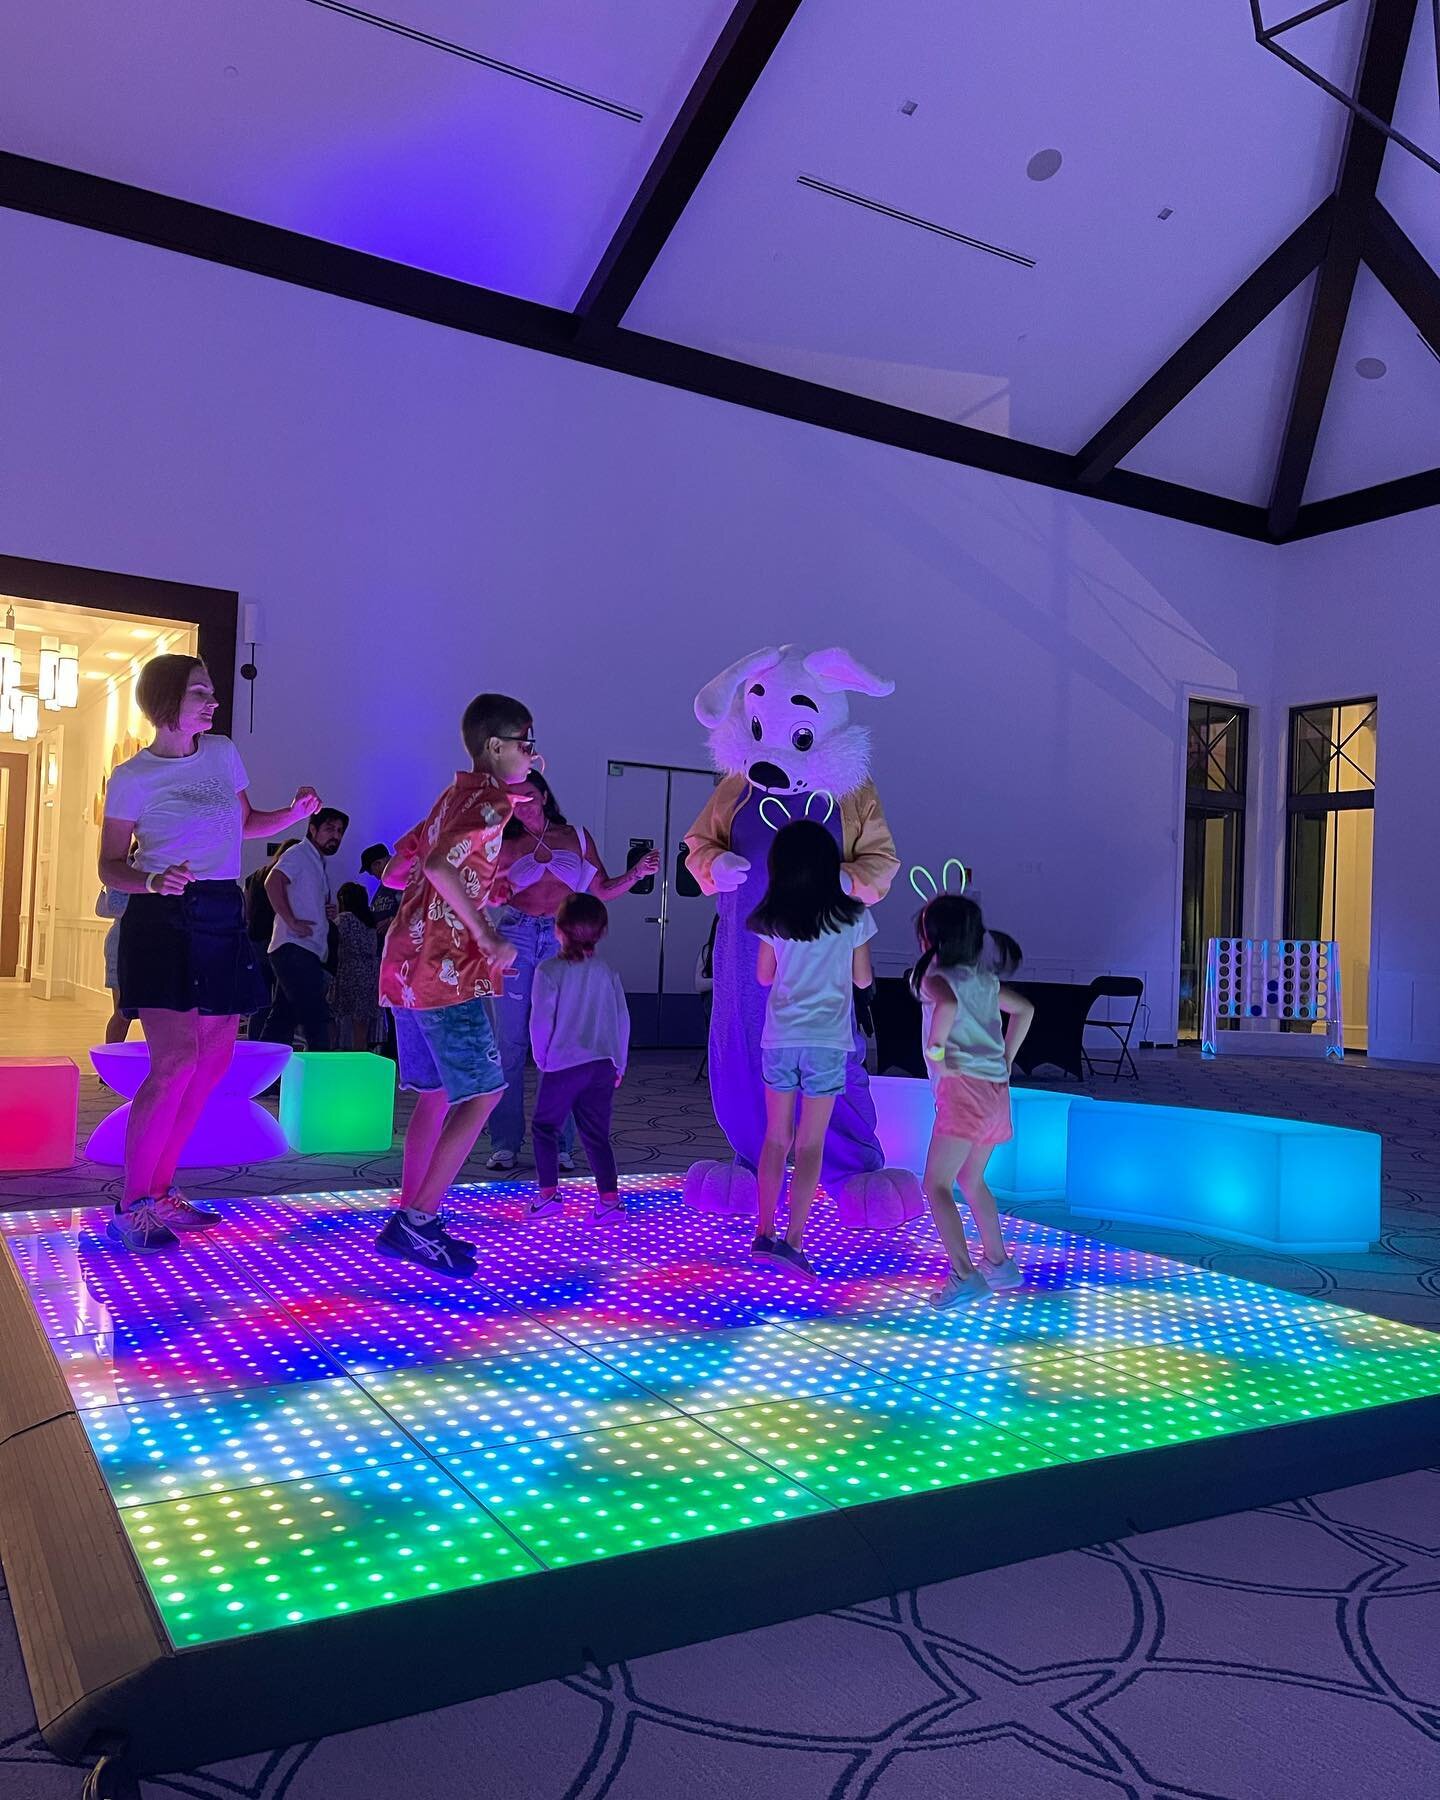 Easter Glowing Extravaganza. We had so much fun customizing the graphics of our LED dancefloor for this Easter event at @avenirpbg  #avenirpbg #goodvibespartyrentals #palmbeachgardens #westpalmbeachevents #leddancefloor